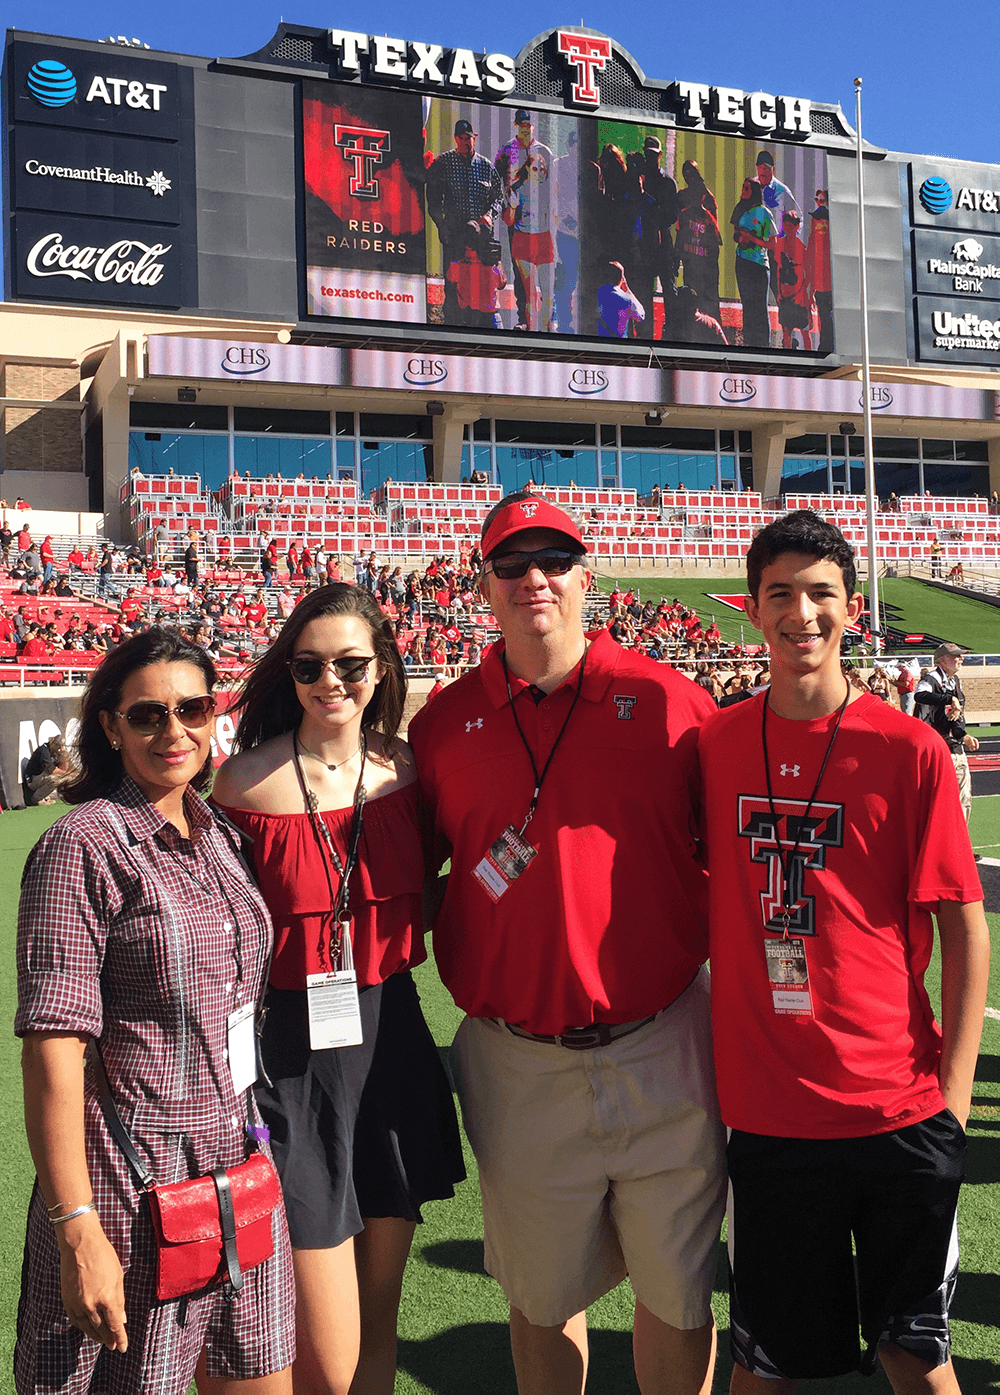 TTU alumni Cecilia and Jim Edwards with their children at a Texas Tech football game